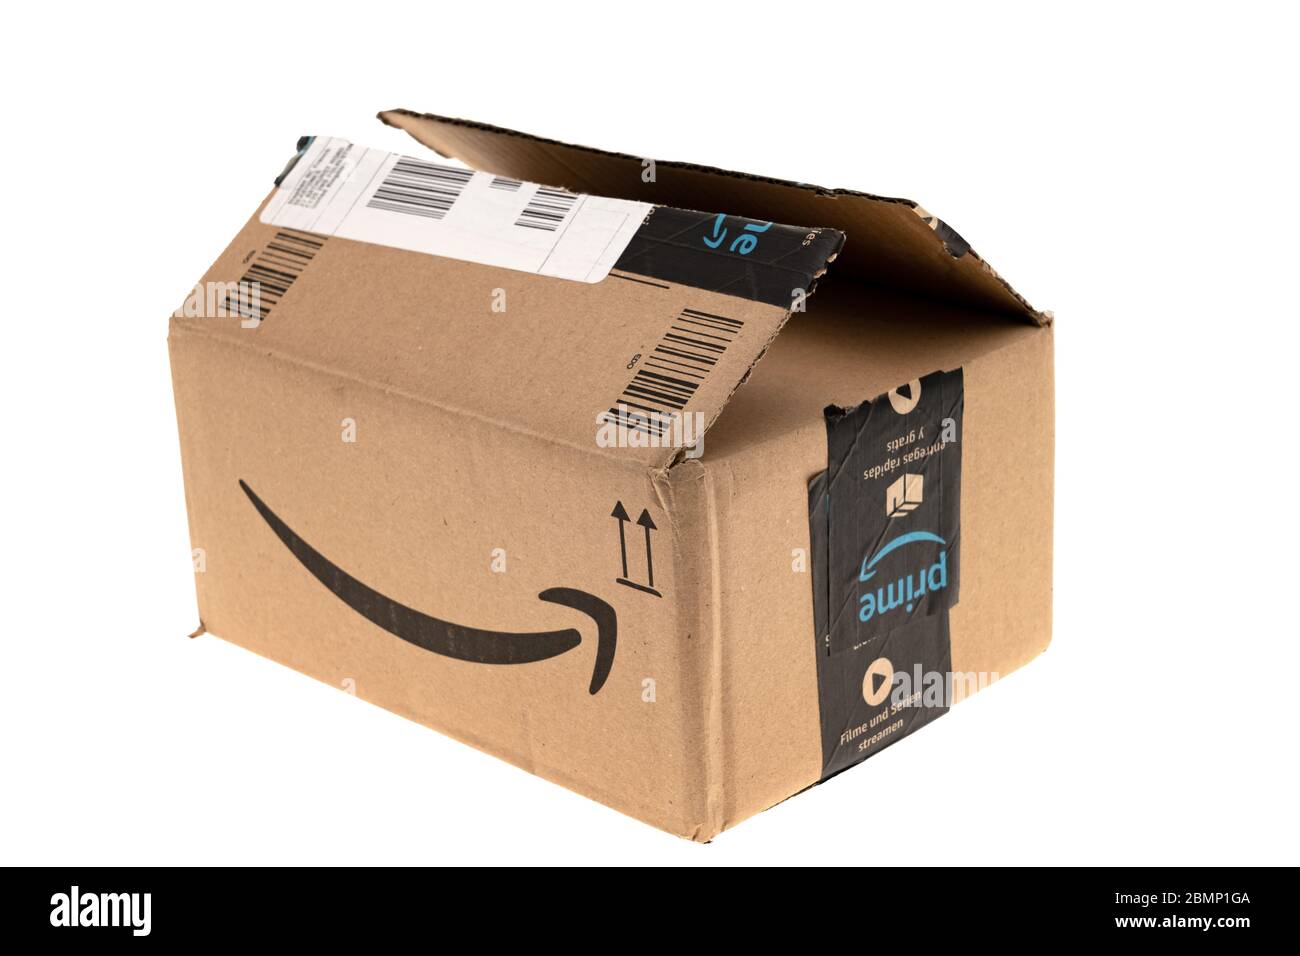 London, United Kingdom - April 10, 2020: Opened  Prime shipping  package or box on a white background. .com went online in 1995 and is  now Stock Photo - Alamy